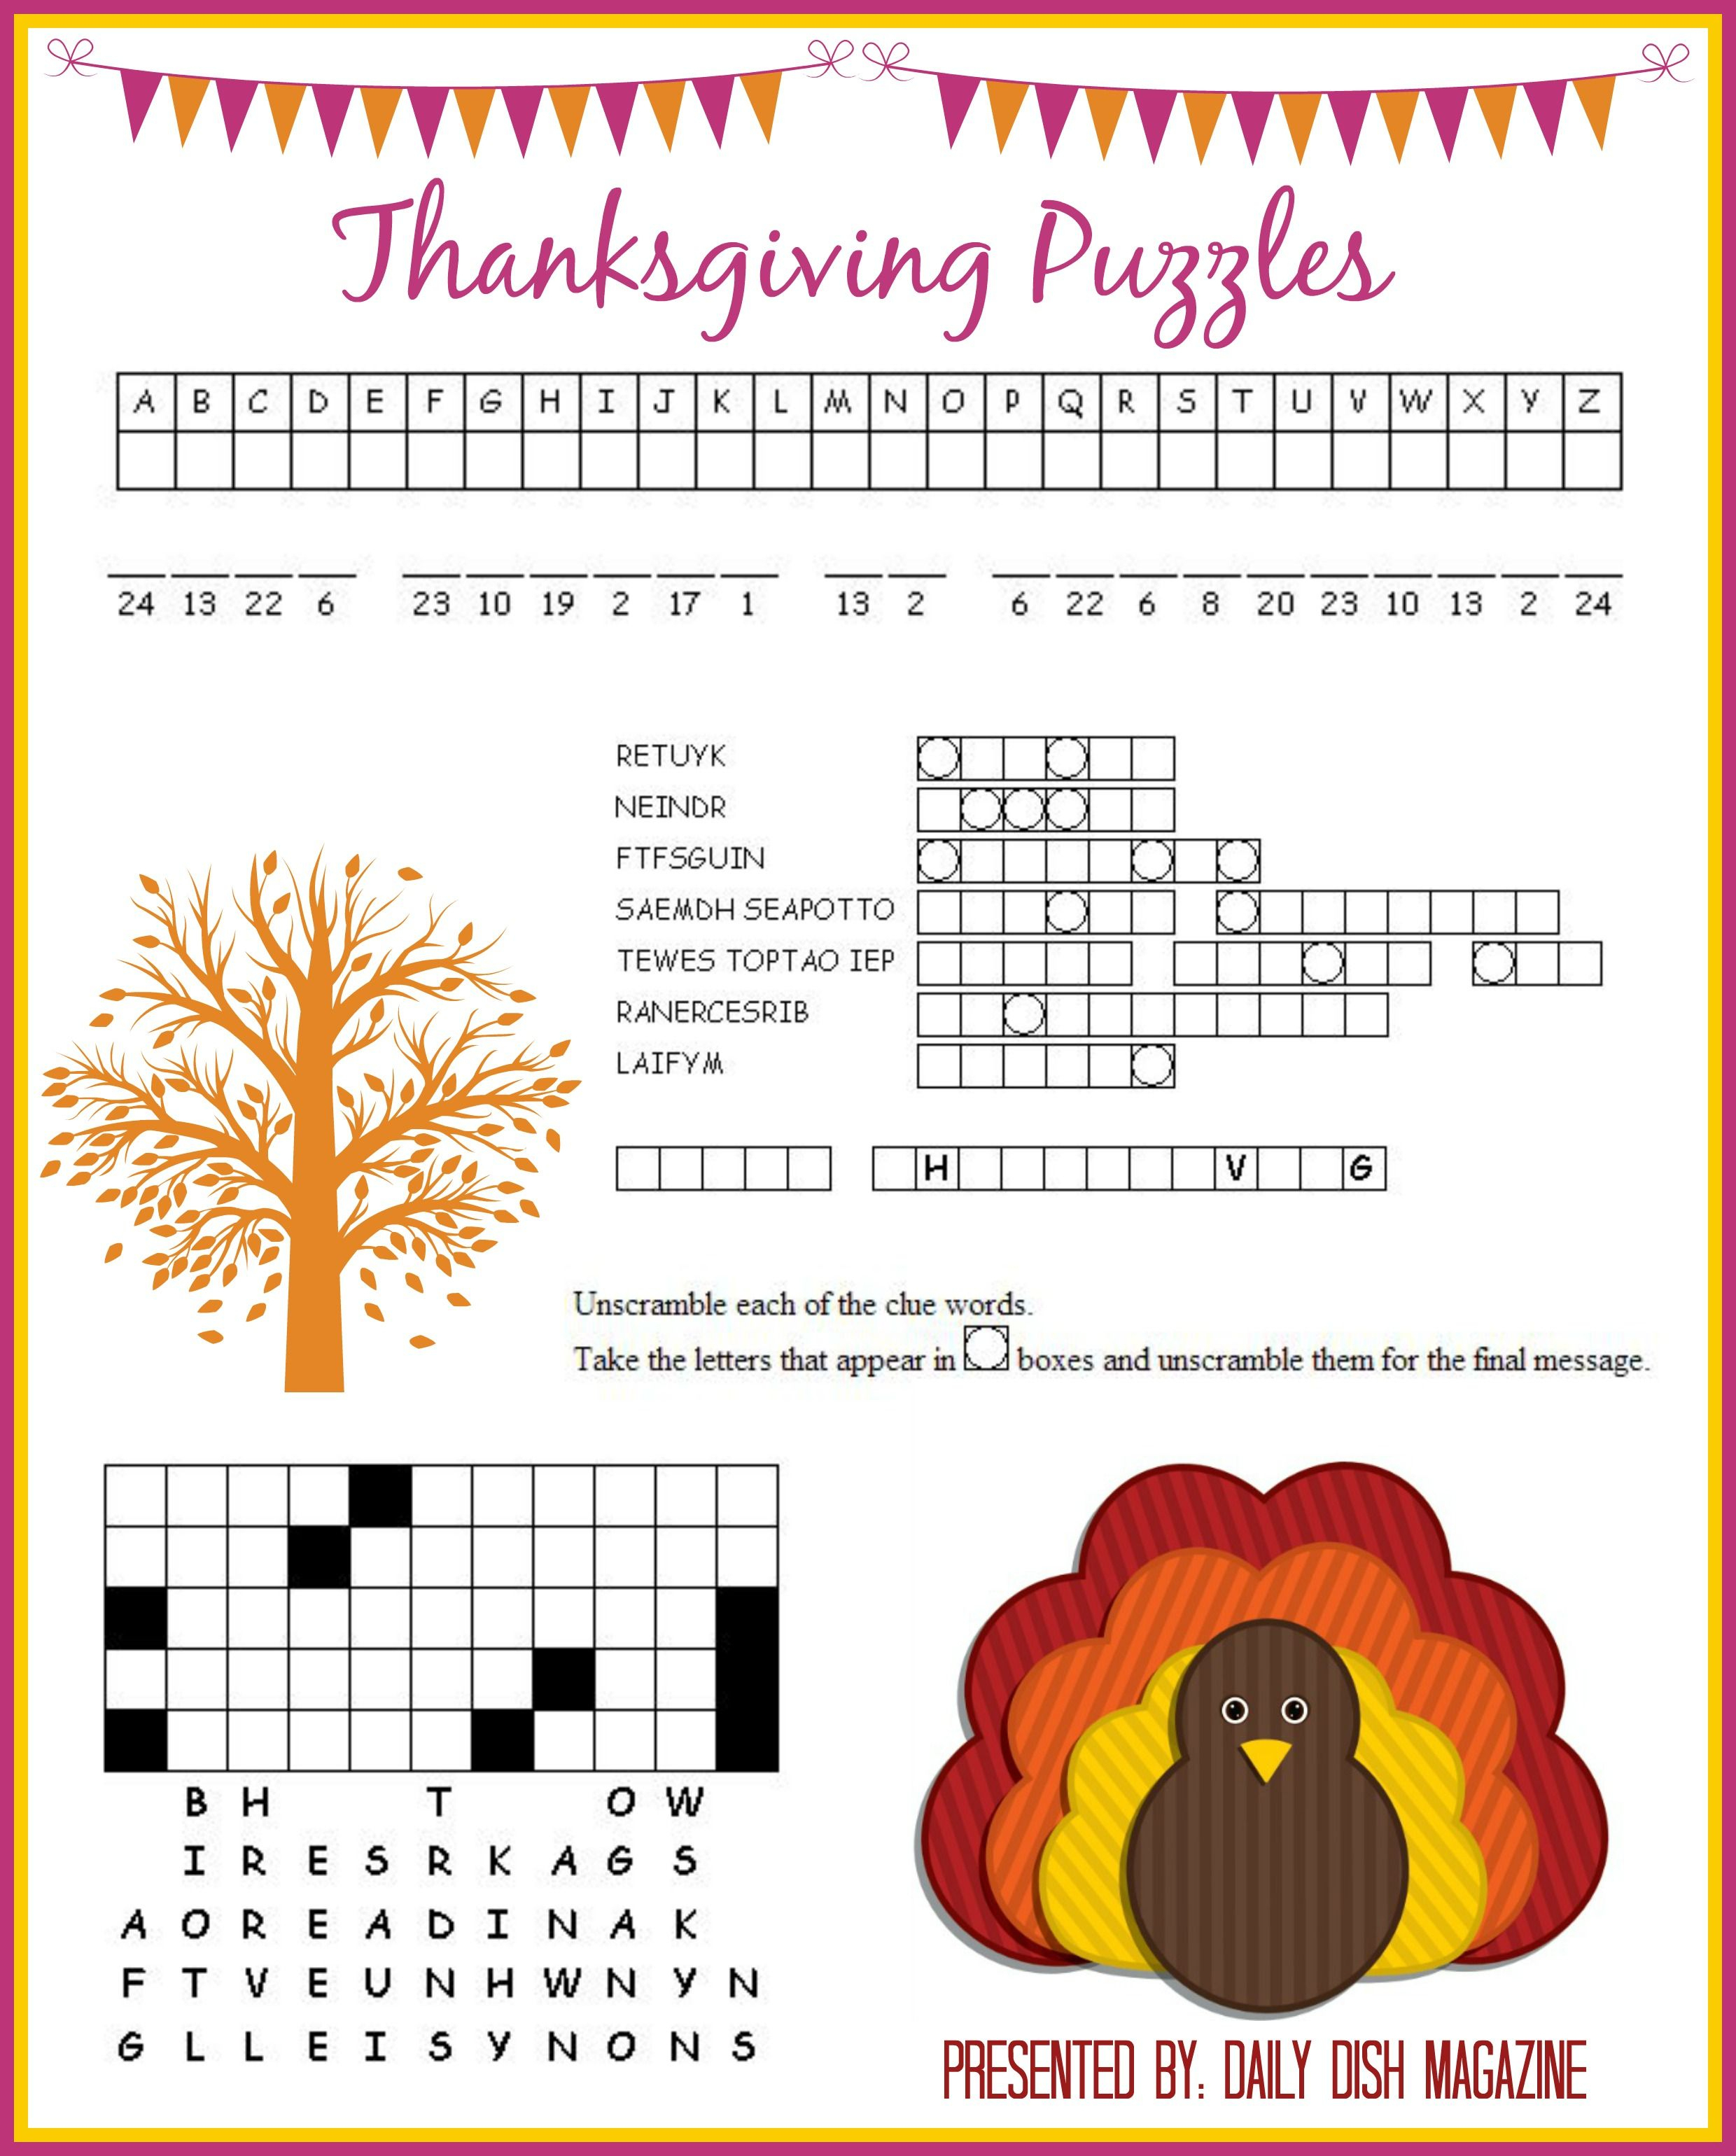 Thanksgiving Puzzles Printables | *holidays We Celebrate - Free Printable Crossword Puzzles Thanksgiving